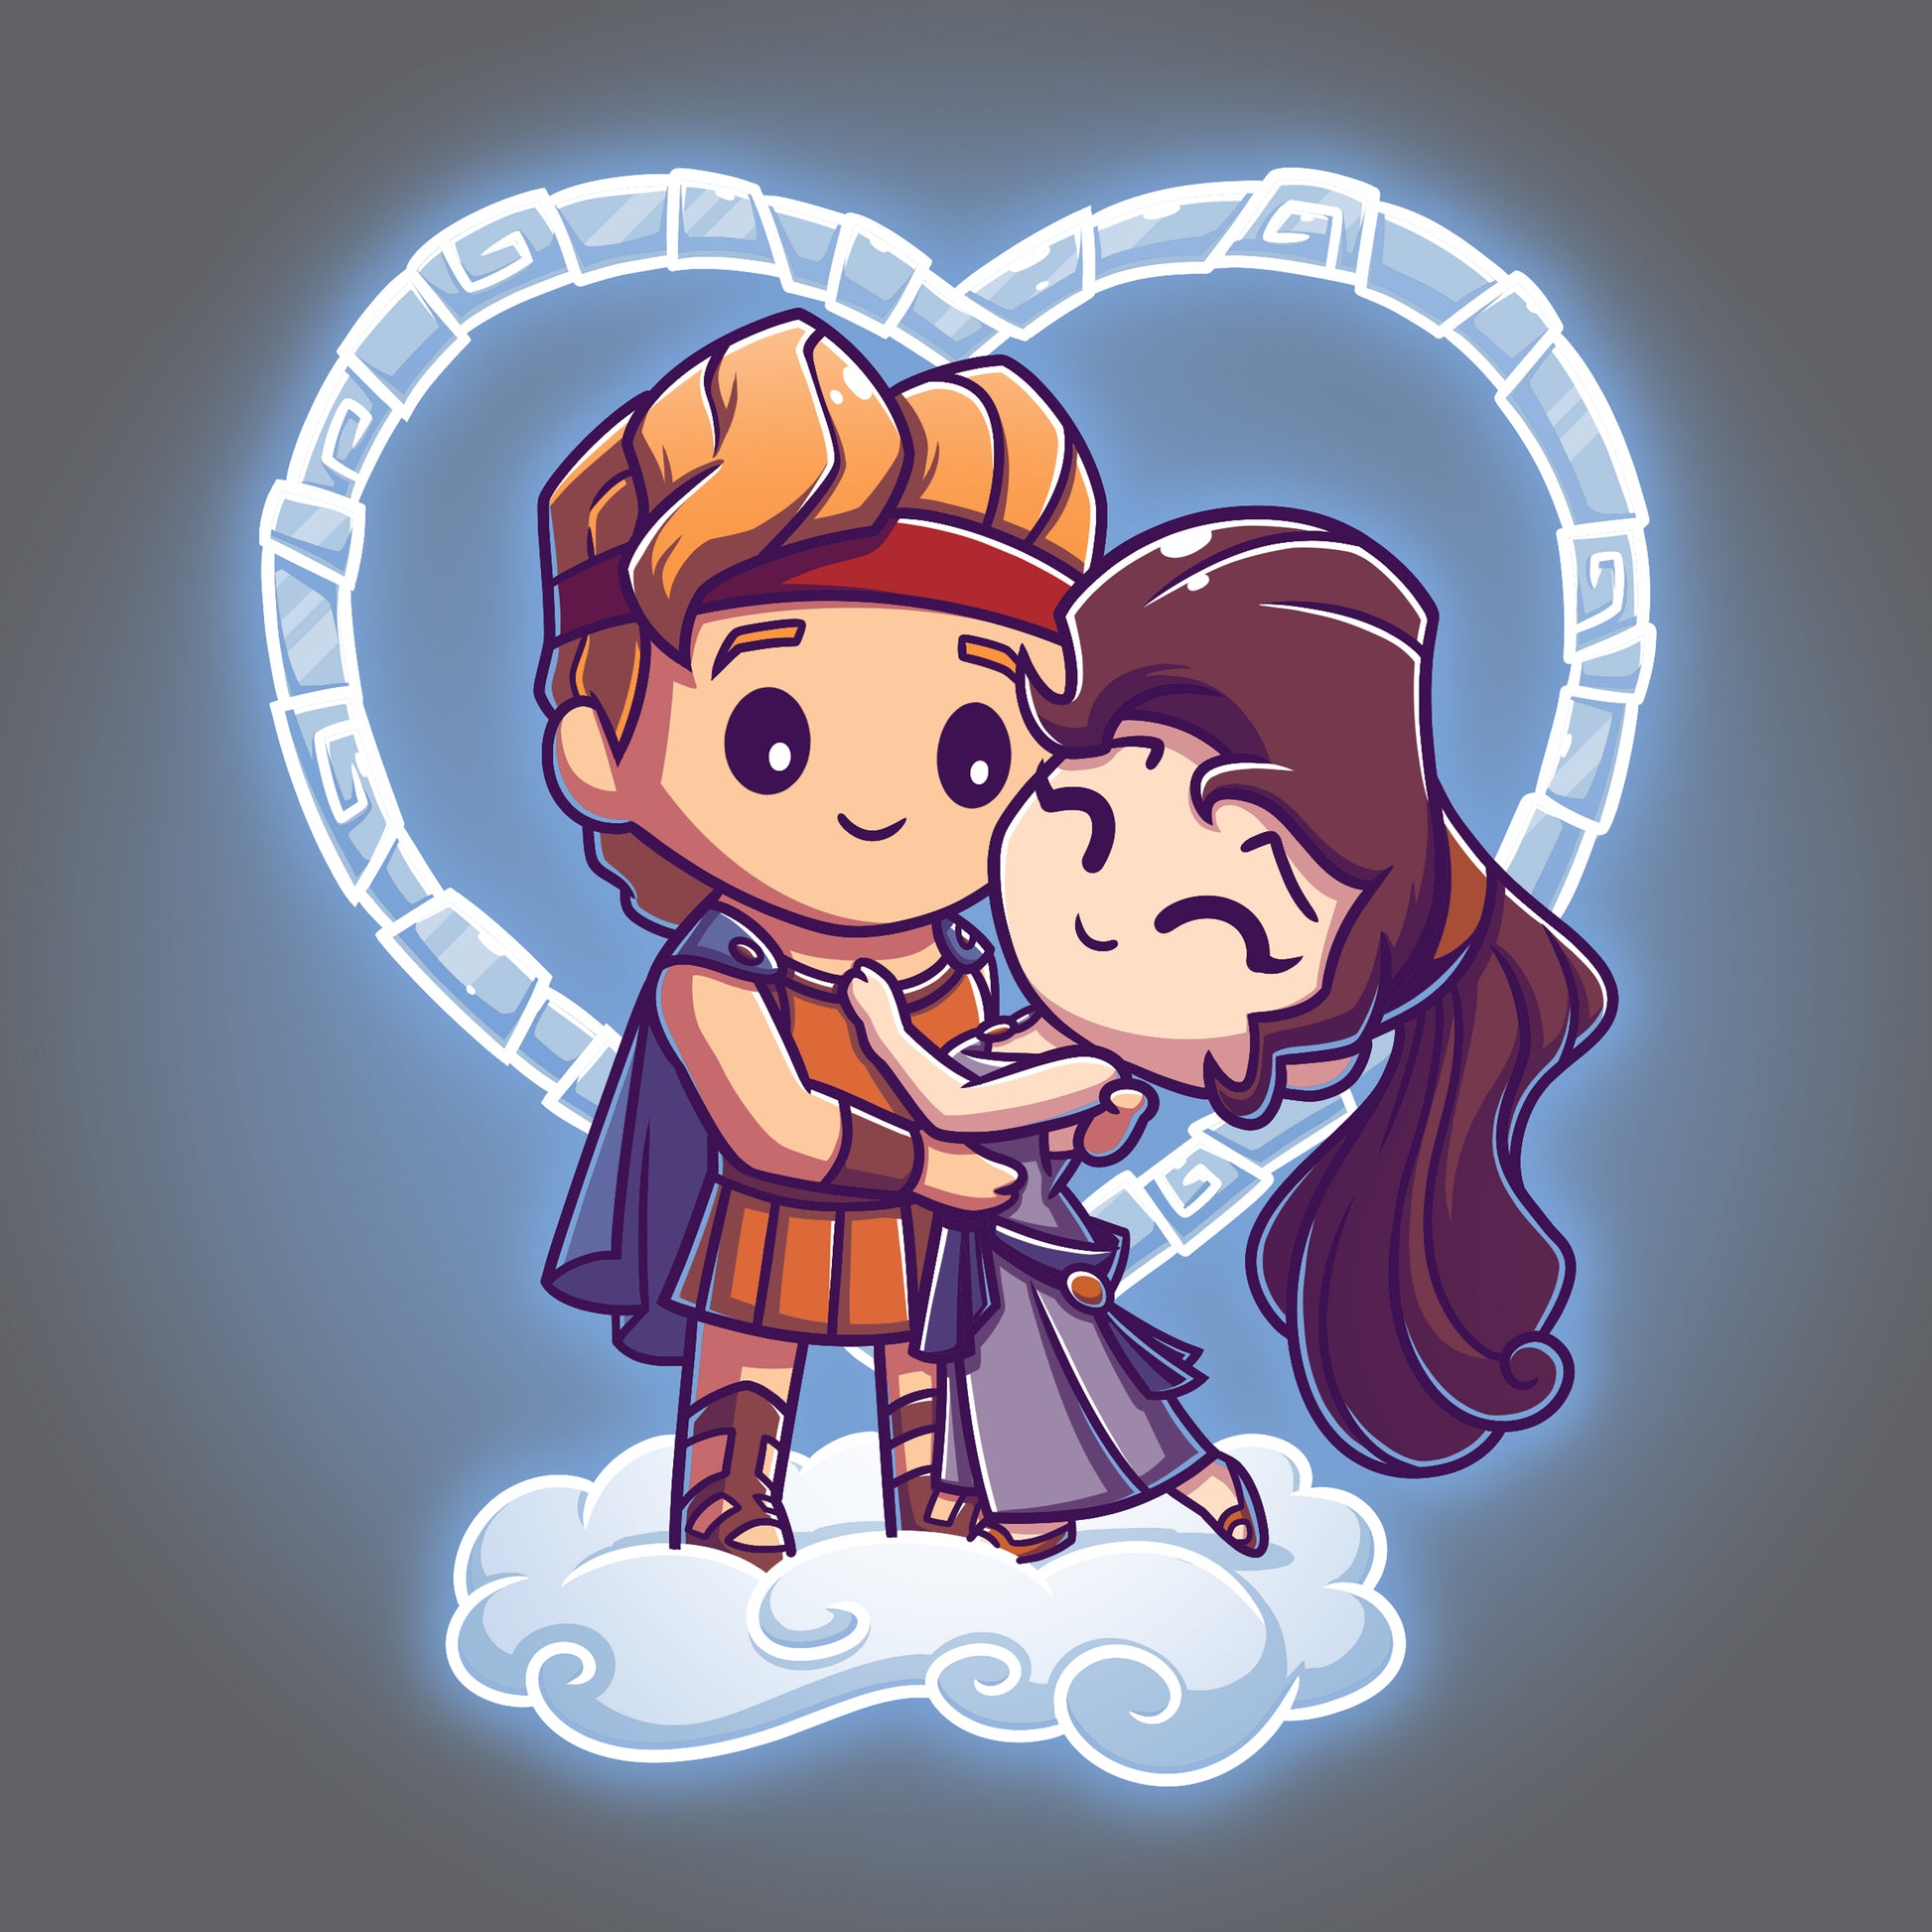 An officially licensed Disney cartoon of Hercules and Megara hugging in front of a heart, perfect for a T-shirt design.